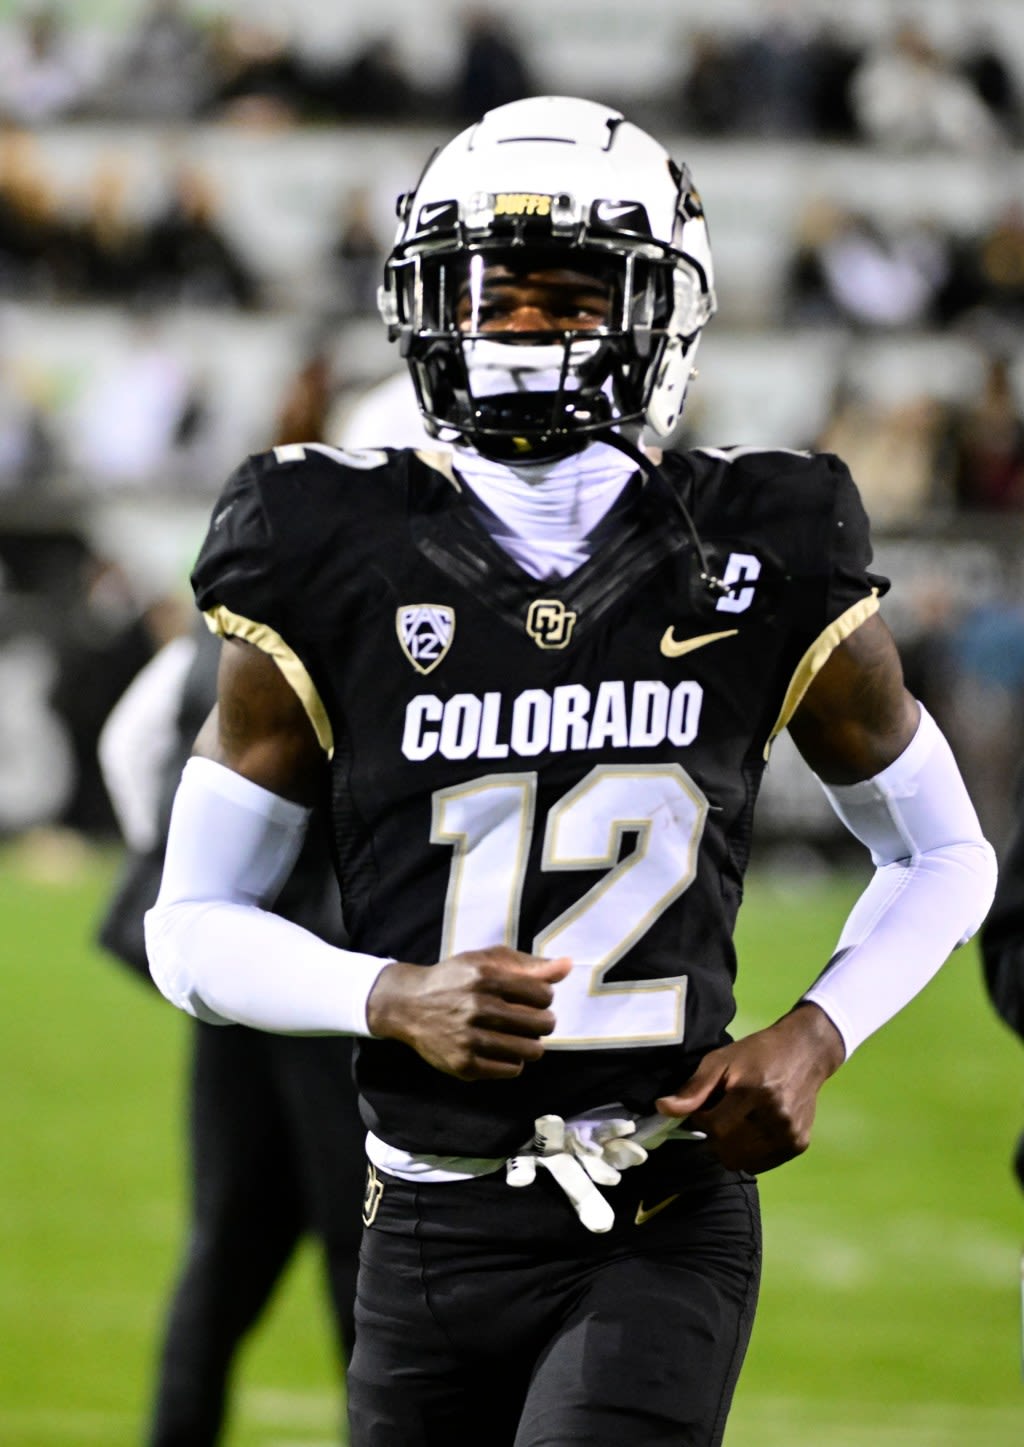 Colorado Buffs football: A look at Coach Prime’s roster